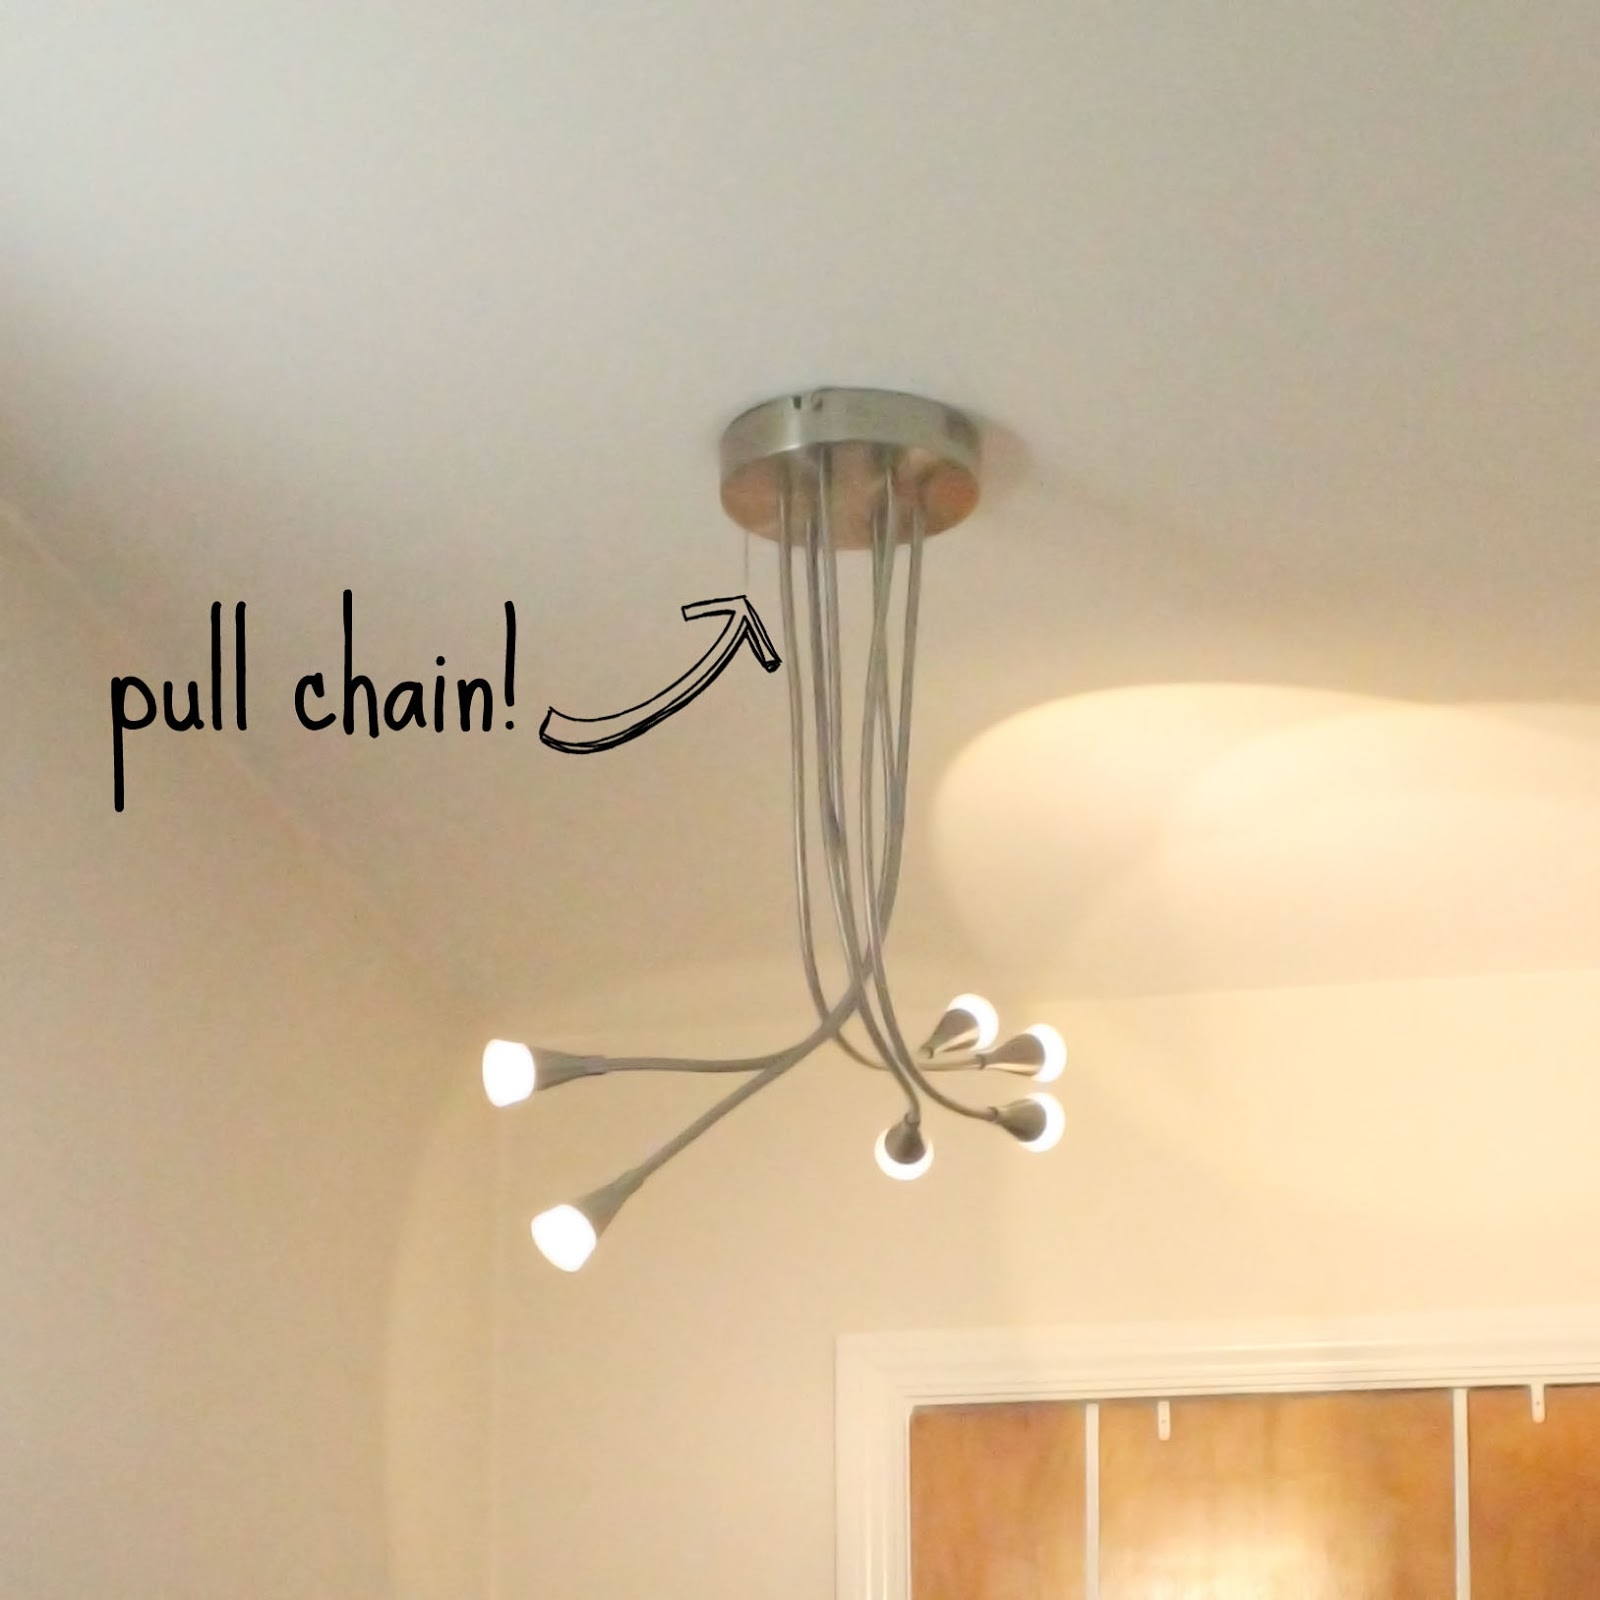 Permalink to Fish Shaped Ceiling Light